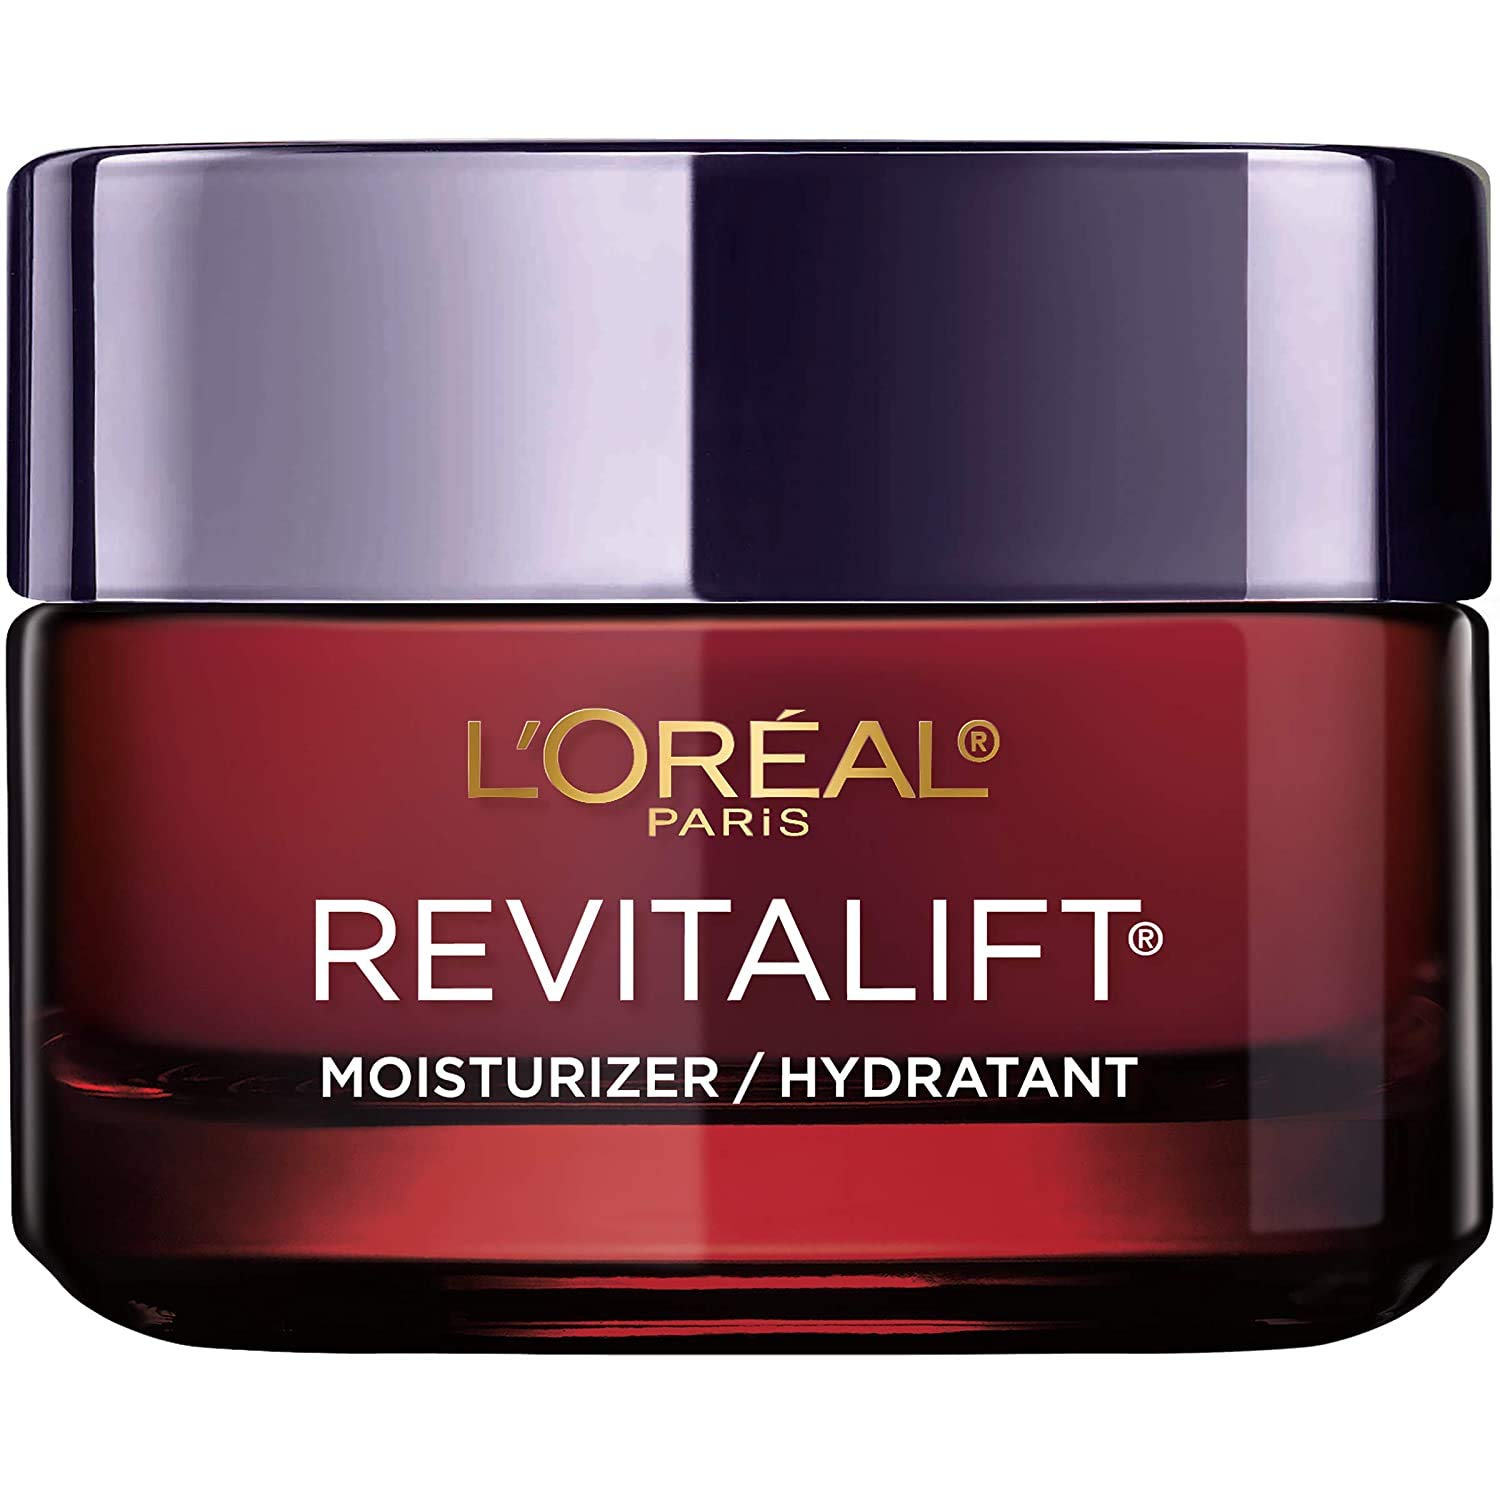 L’Oreal Paris Skincare Revitalift Triple Power Anti-Aging Face Moisturizer with Pro Retinol, Hyaluronic Acid & Vitamin C to reduce wrinkles, firm and brighten skin, 1.7 Oz $10.86